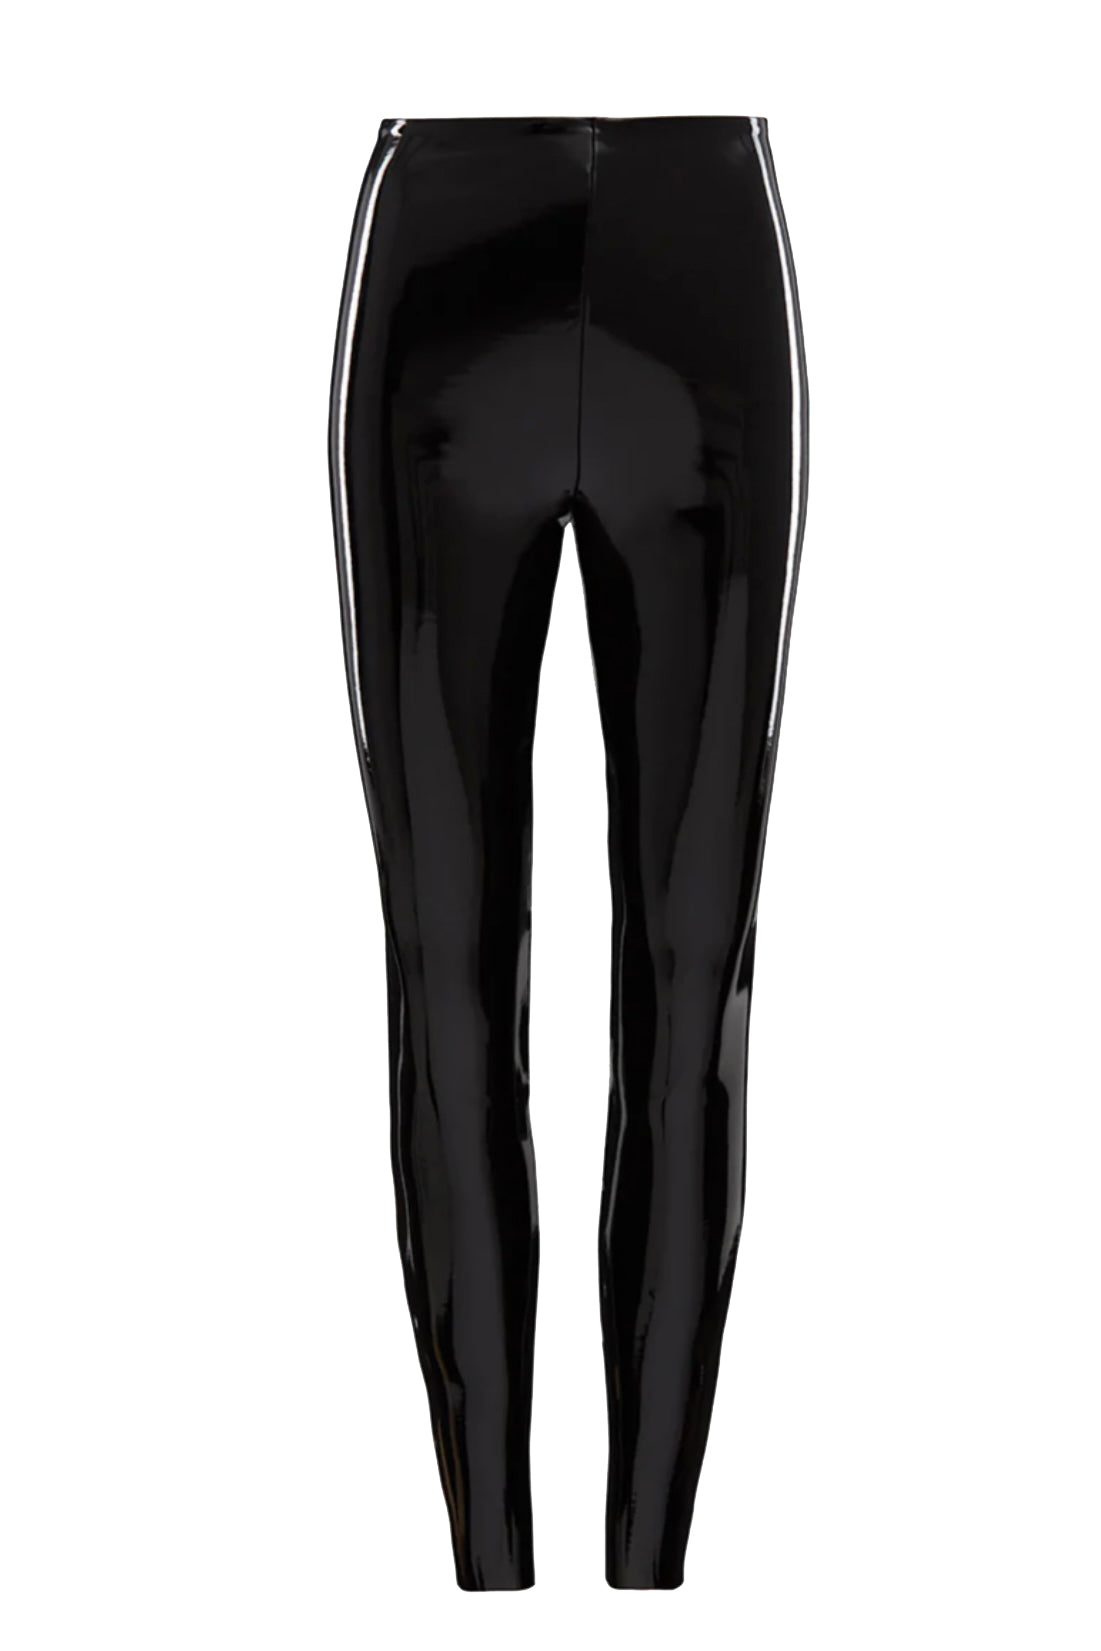 SPANX - It's FINALLY here: Faux Leather Leggings in patent